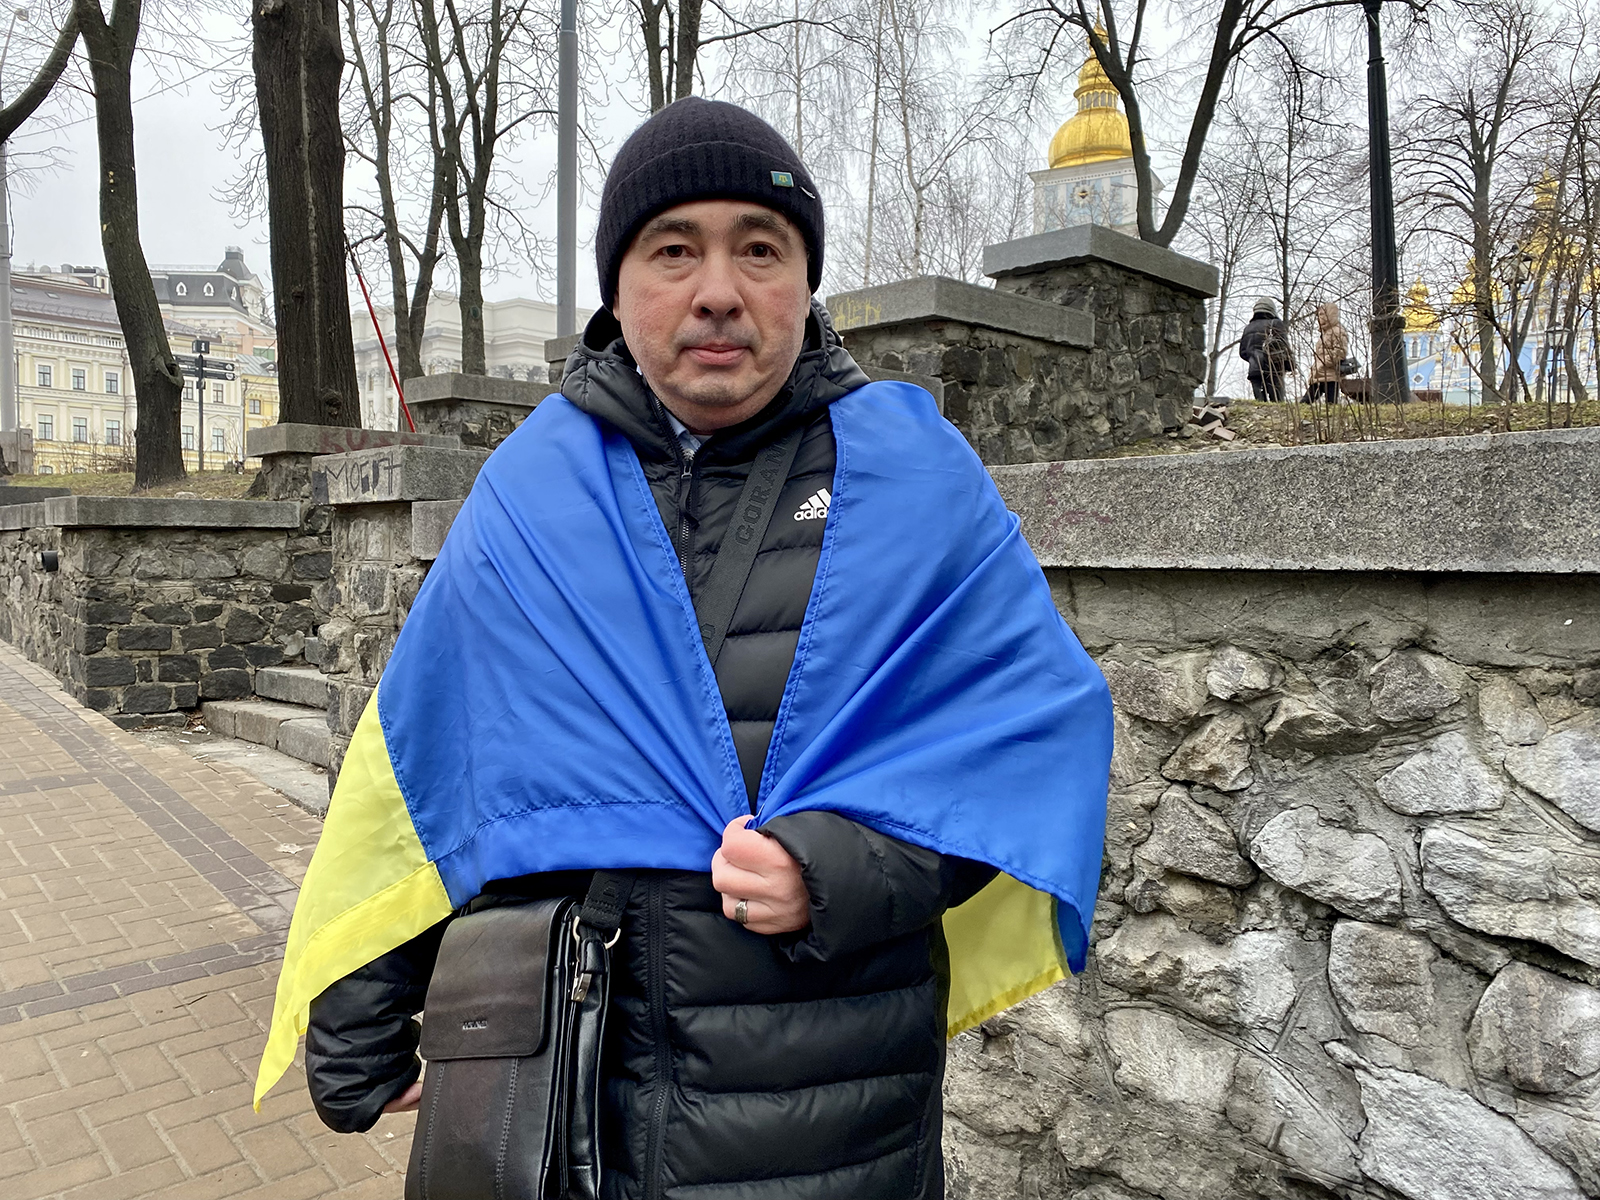 Alim, who is from Crimea, says he has been carrying his Ukrainian flag around every day for the past eight years - ever since Russia annexed the peninsula.